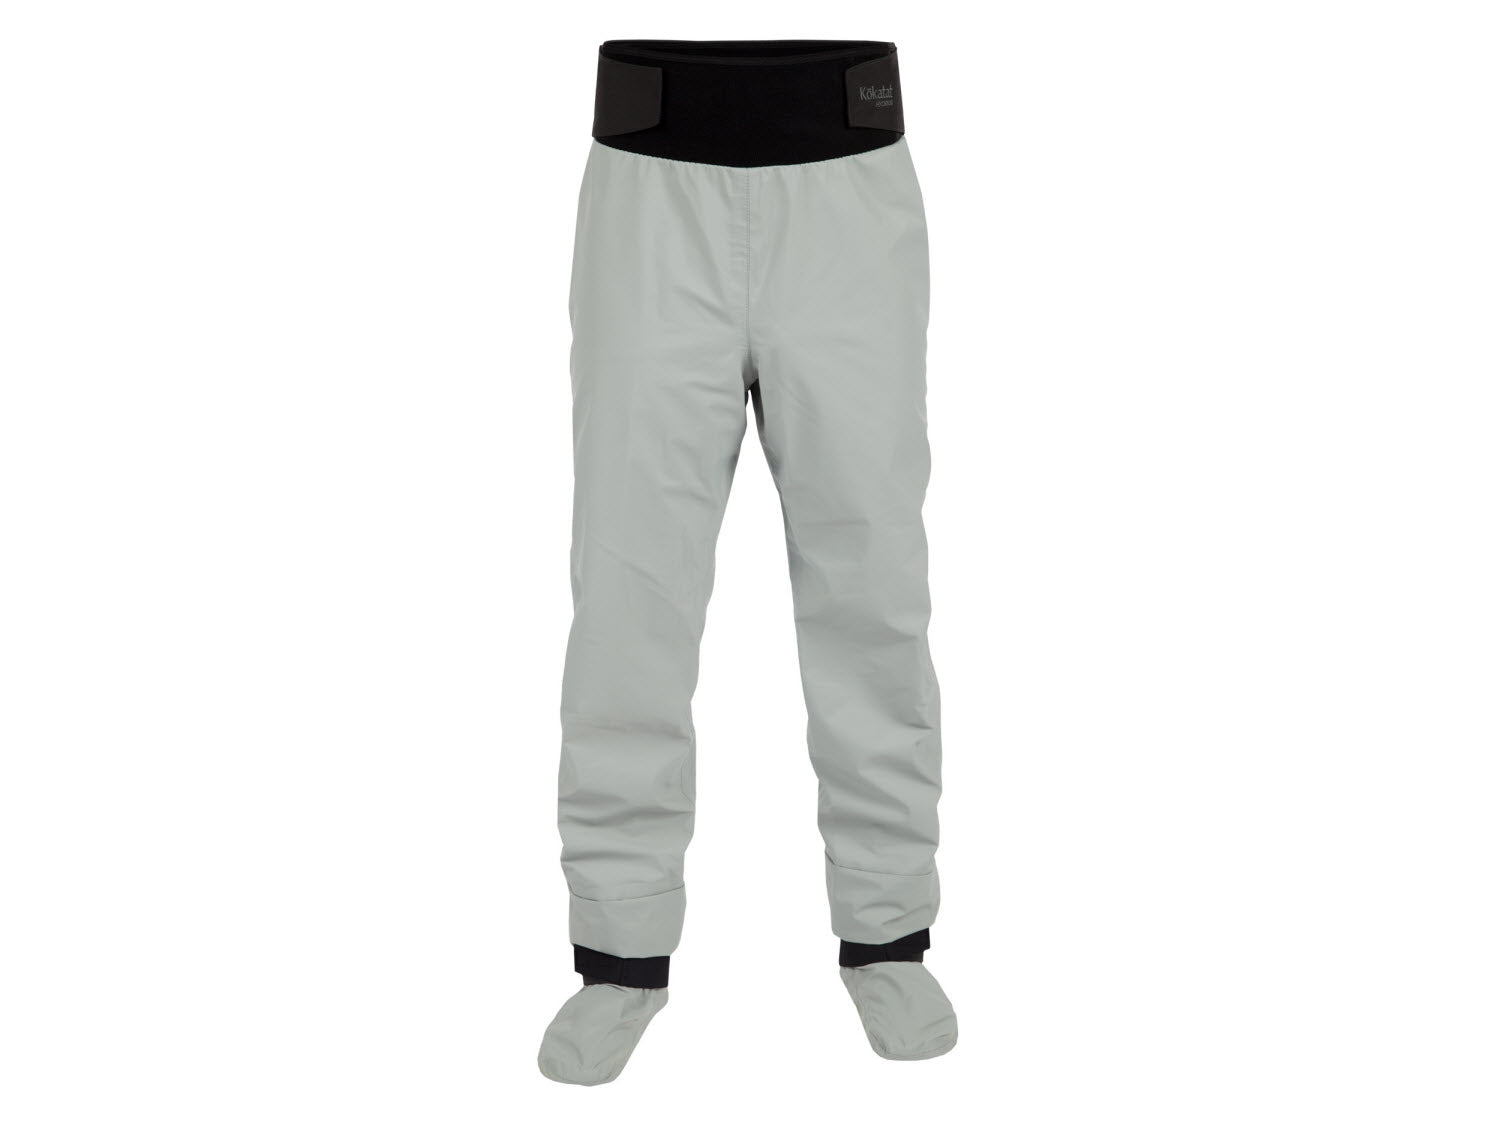 Lolo Pants - Paddling Buyer's Guide